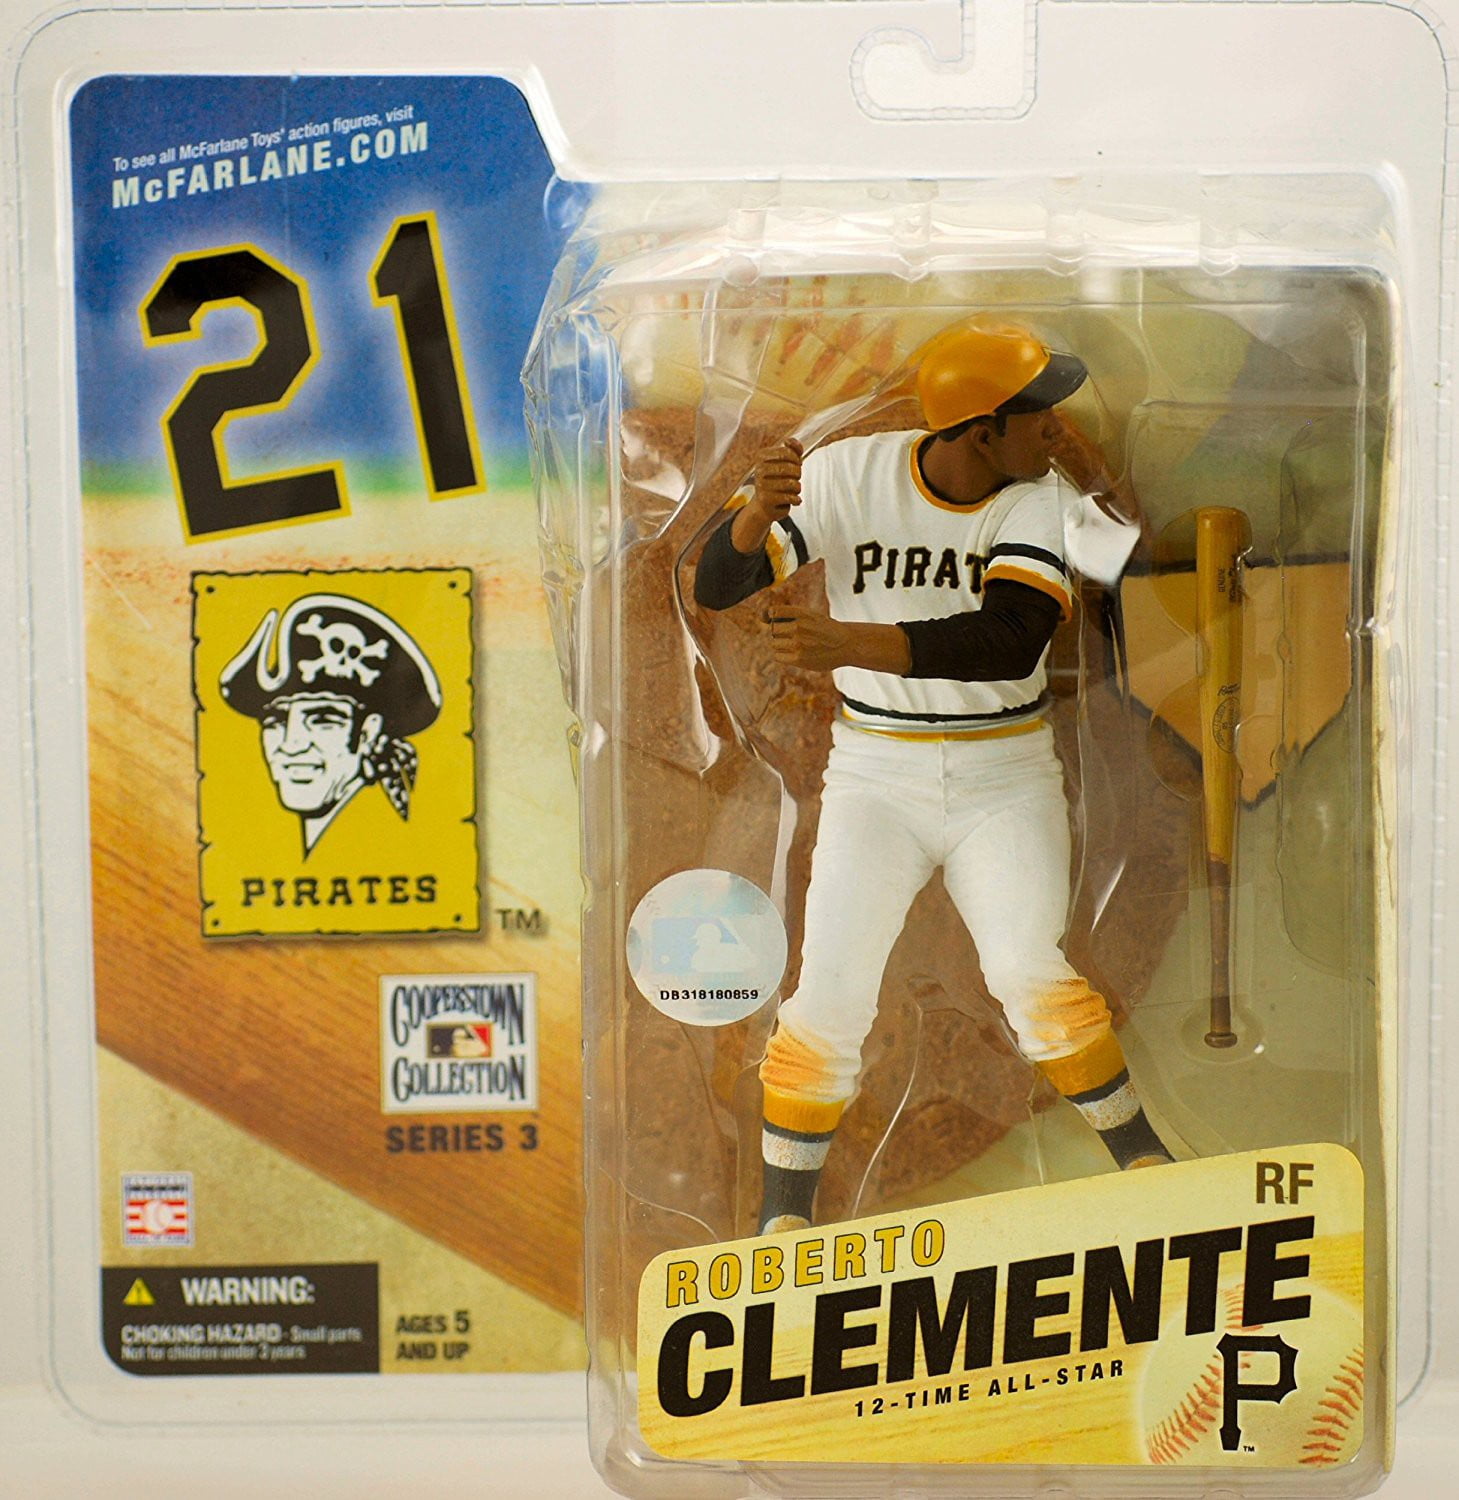 McFarlane MLB Cooperstown Collection Series 3 Roberto Clemente